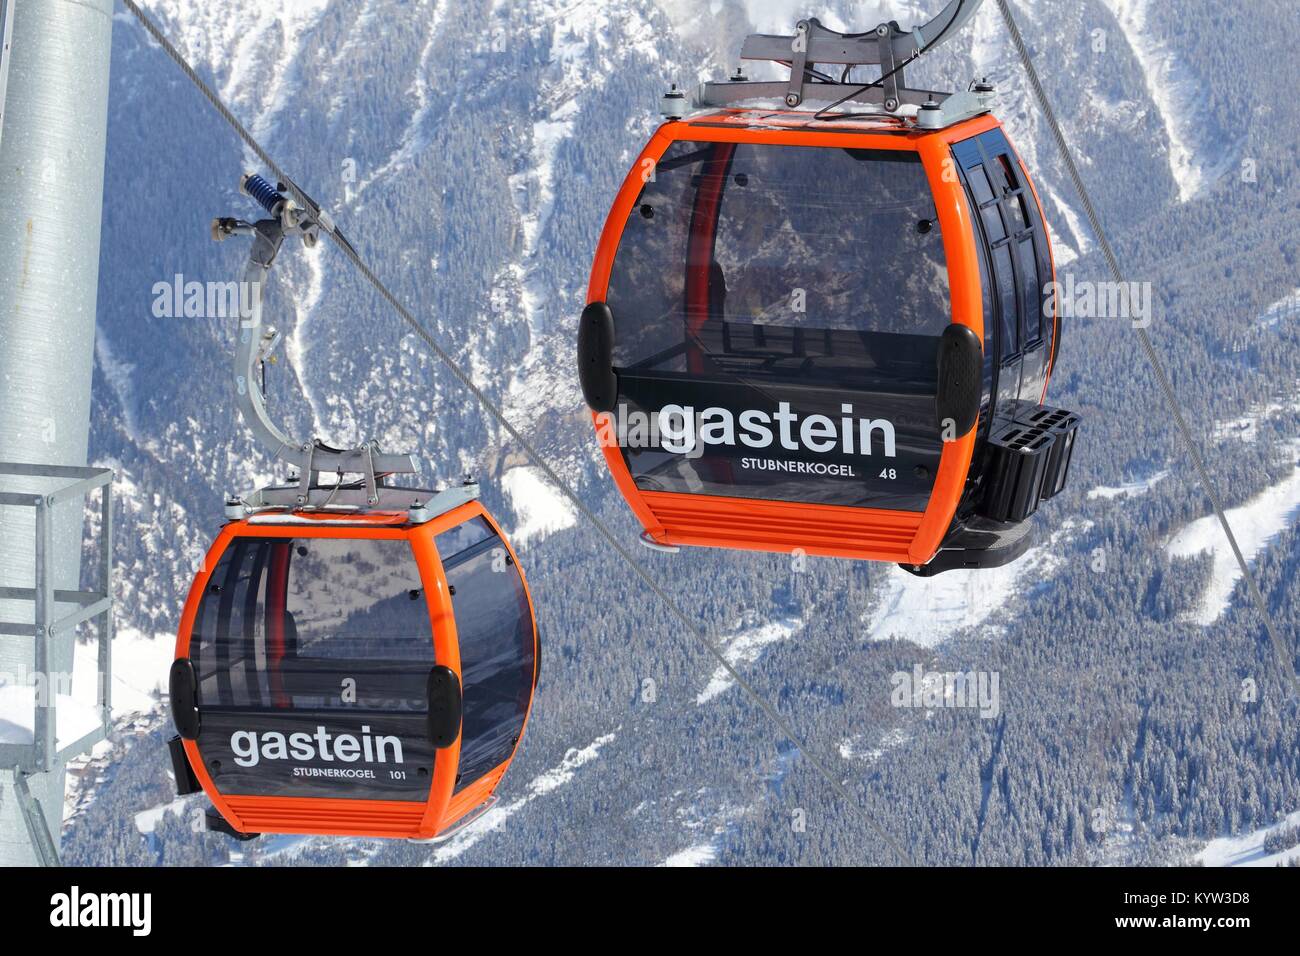 BAD GASTEIN, AUSTRIA - MARCH 10, 2016: Gondolas of cable car in Bad Gastein. It is part of Ski Amade, one of largest ski regions in Europe with 760km  Stock Photo